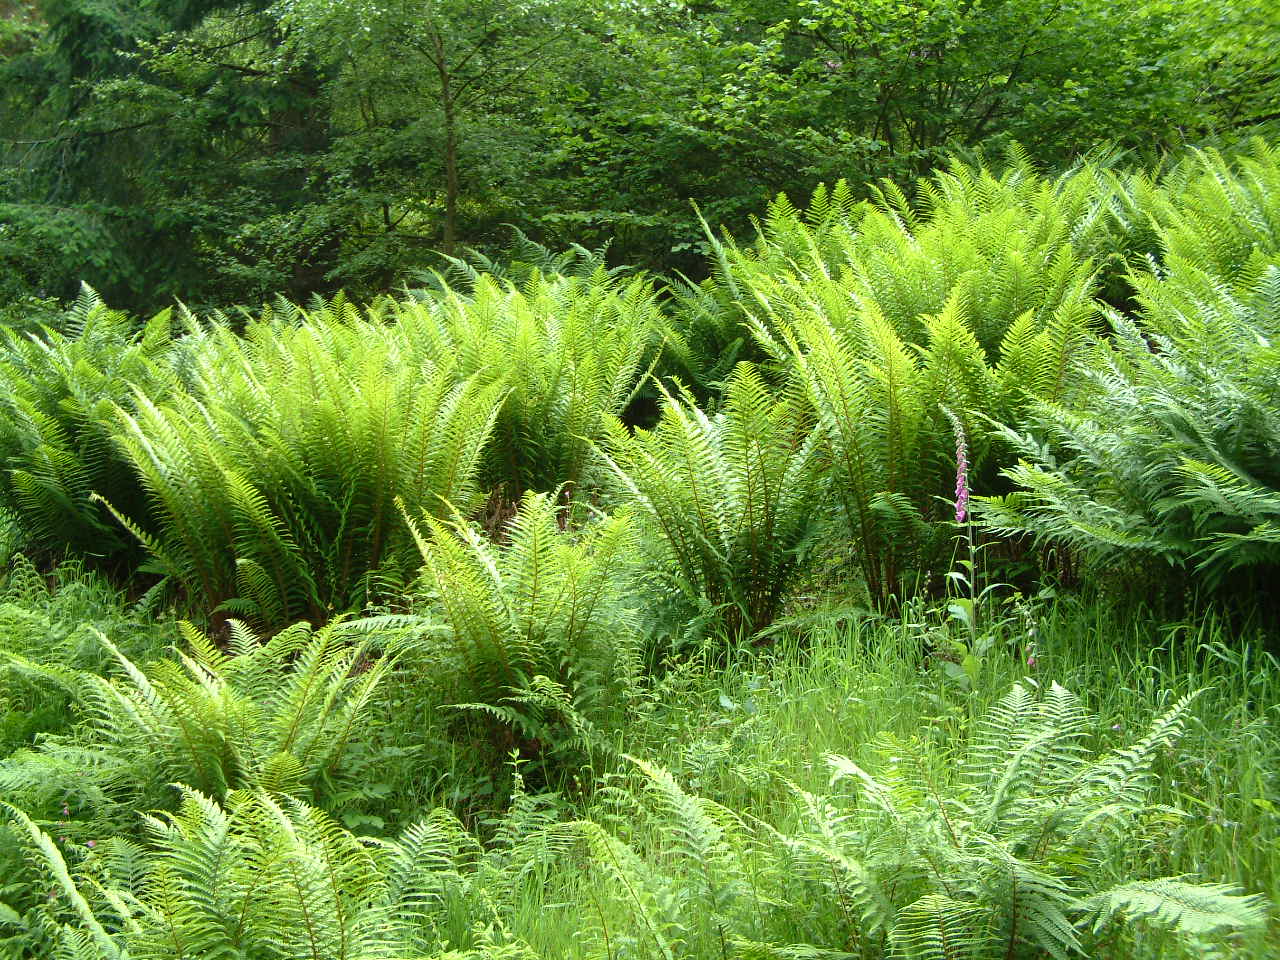 Bracken_and_Ferns_in_the_Quantock_Hills_and_Forest.jpg